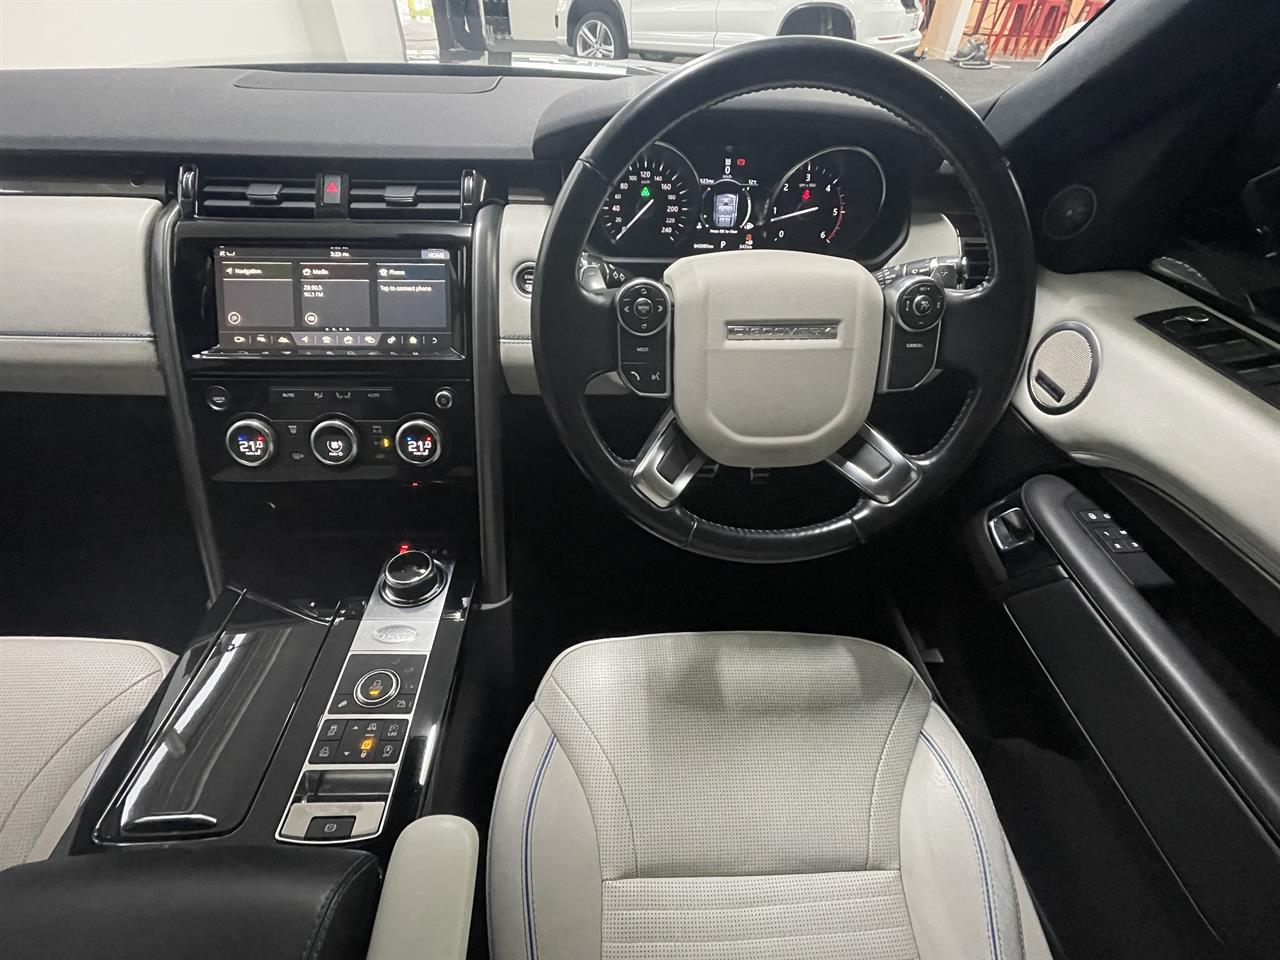 2018 Land Rover Discovery TD6 HSE Luxury 3.0D 7 Seater image 10